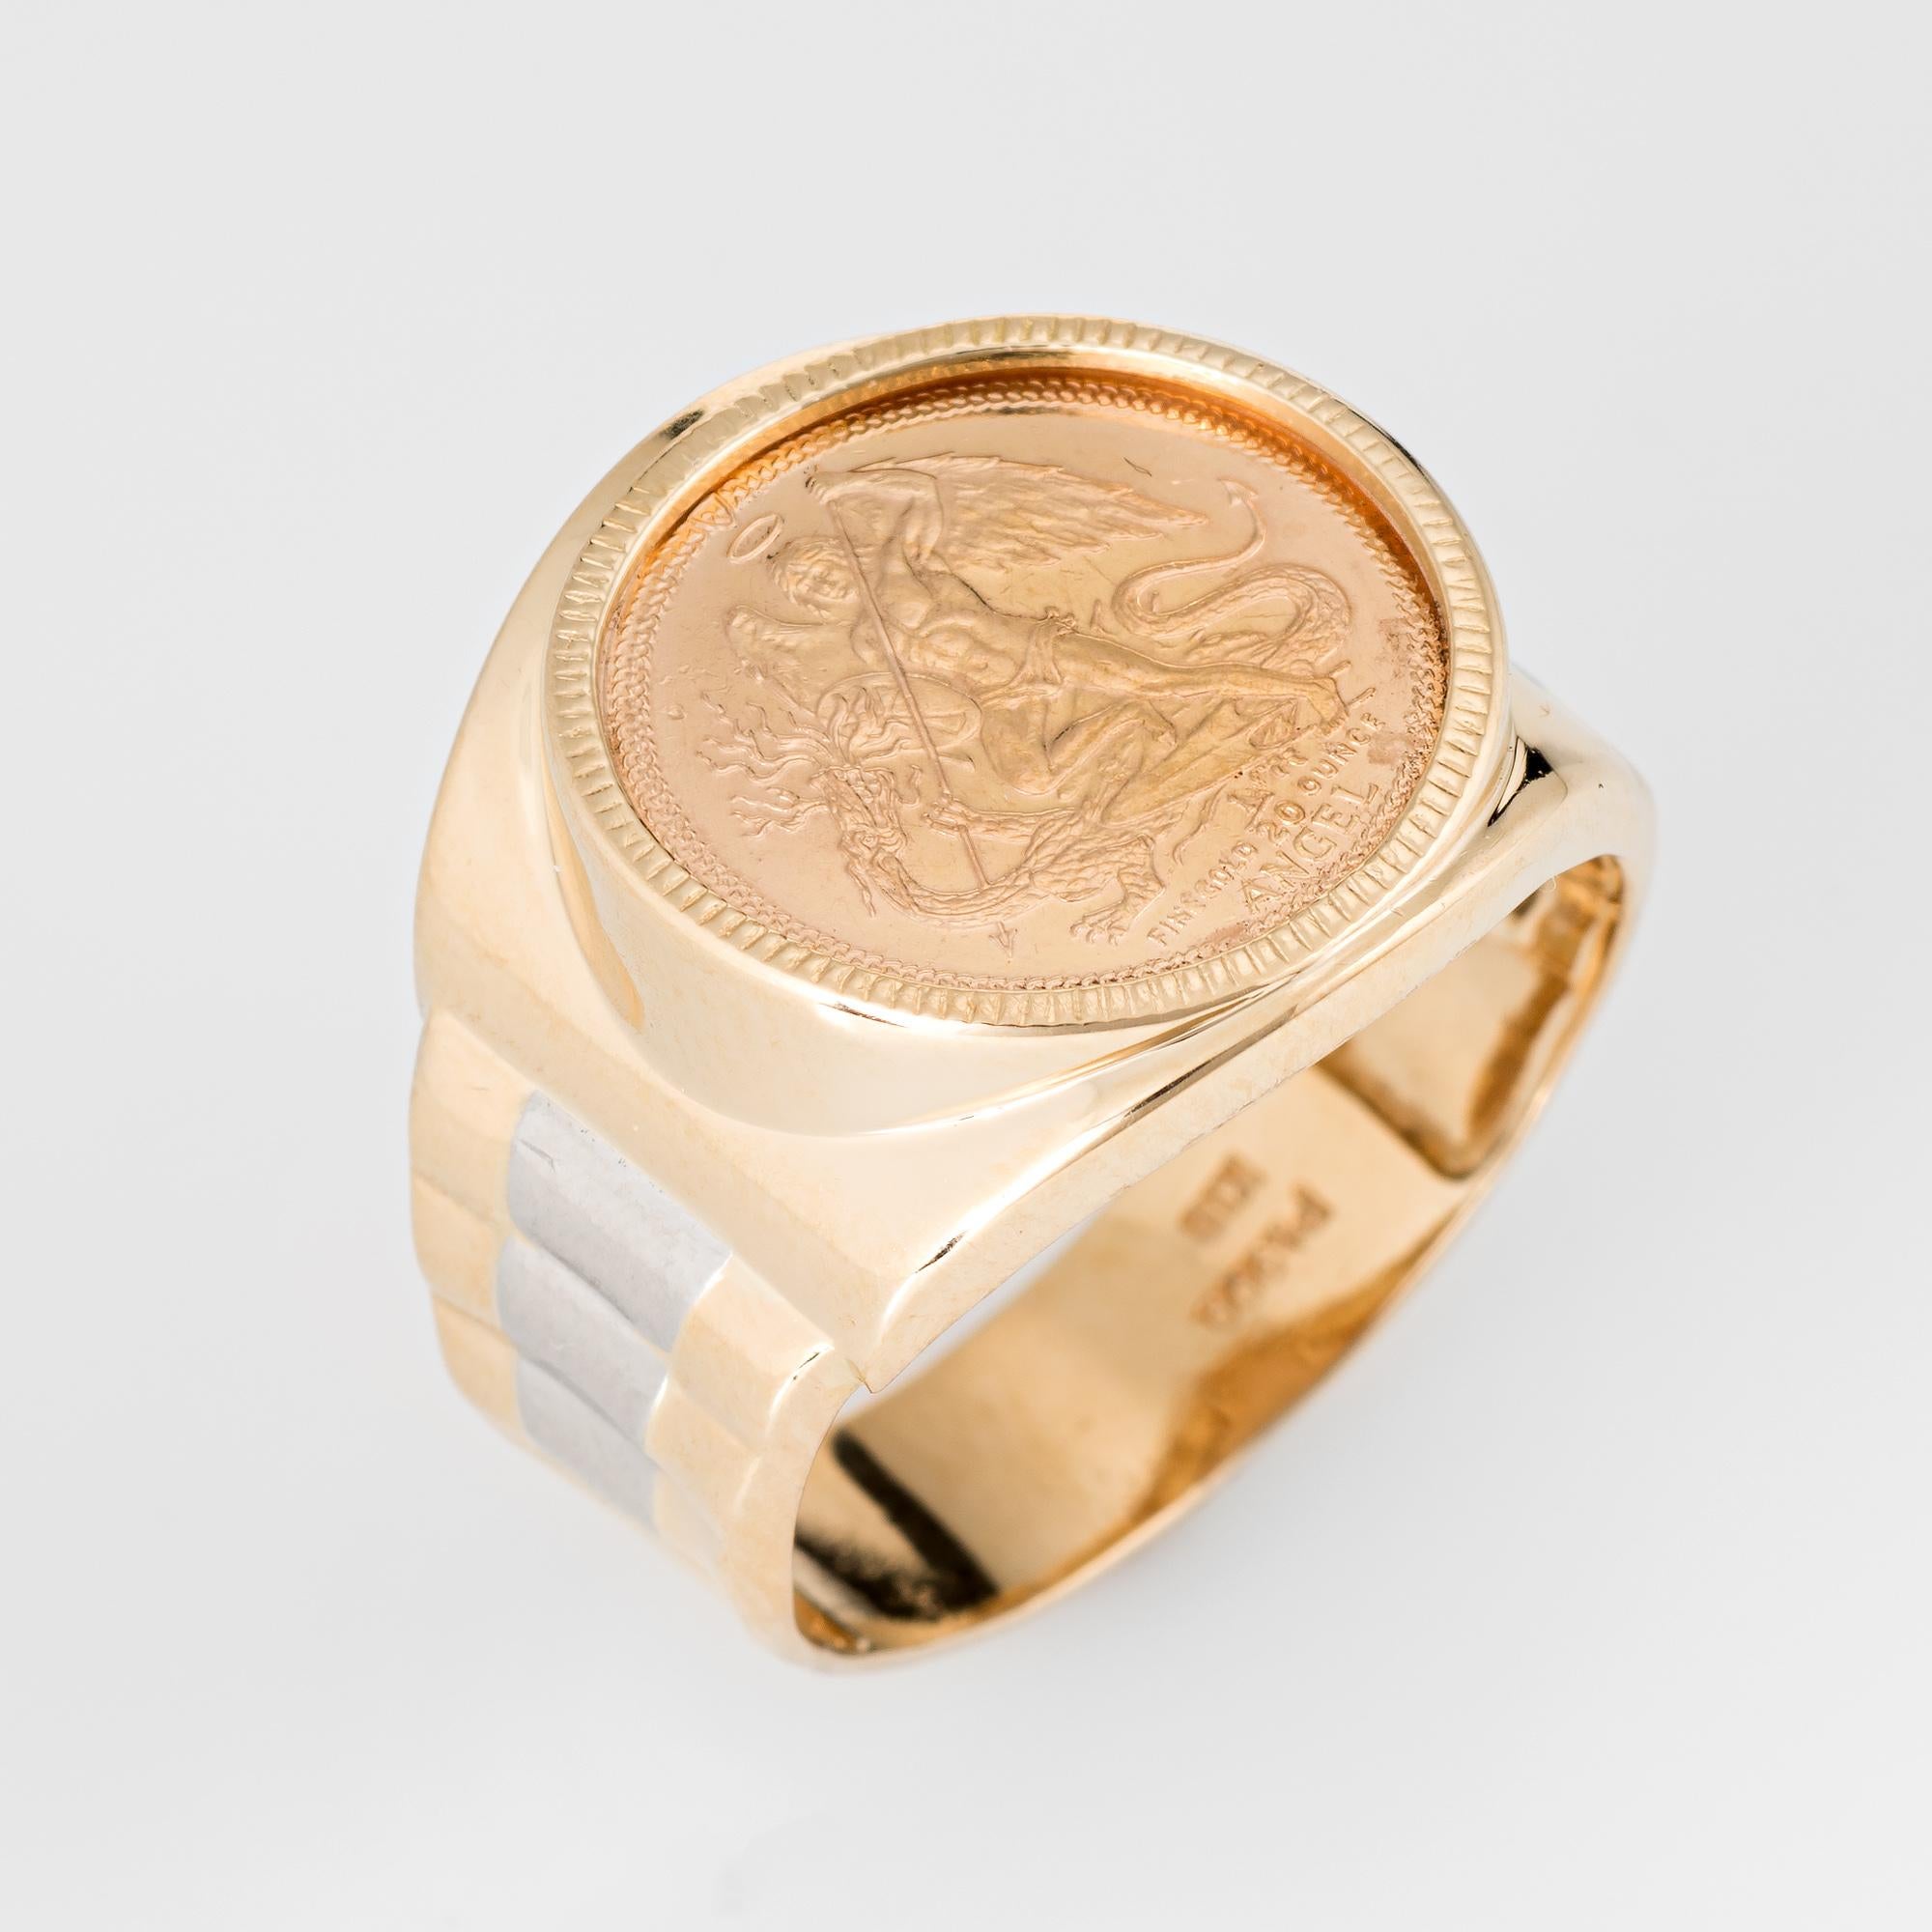 Stylish vintage coin ring (circa 1990) crafted in 18 karat yellow gold and 900 platinum. 

The Isle of Man coin (finegold 1/20 ounce) features the archangel Michael slaying a dragon. The low rise ring (2.5mm - 0.09 inches) sits comfortably on the